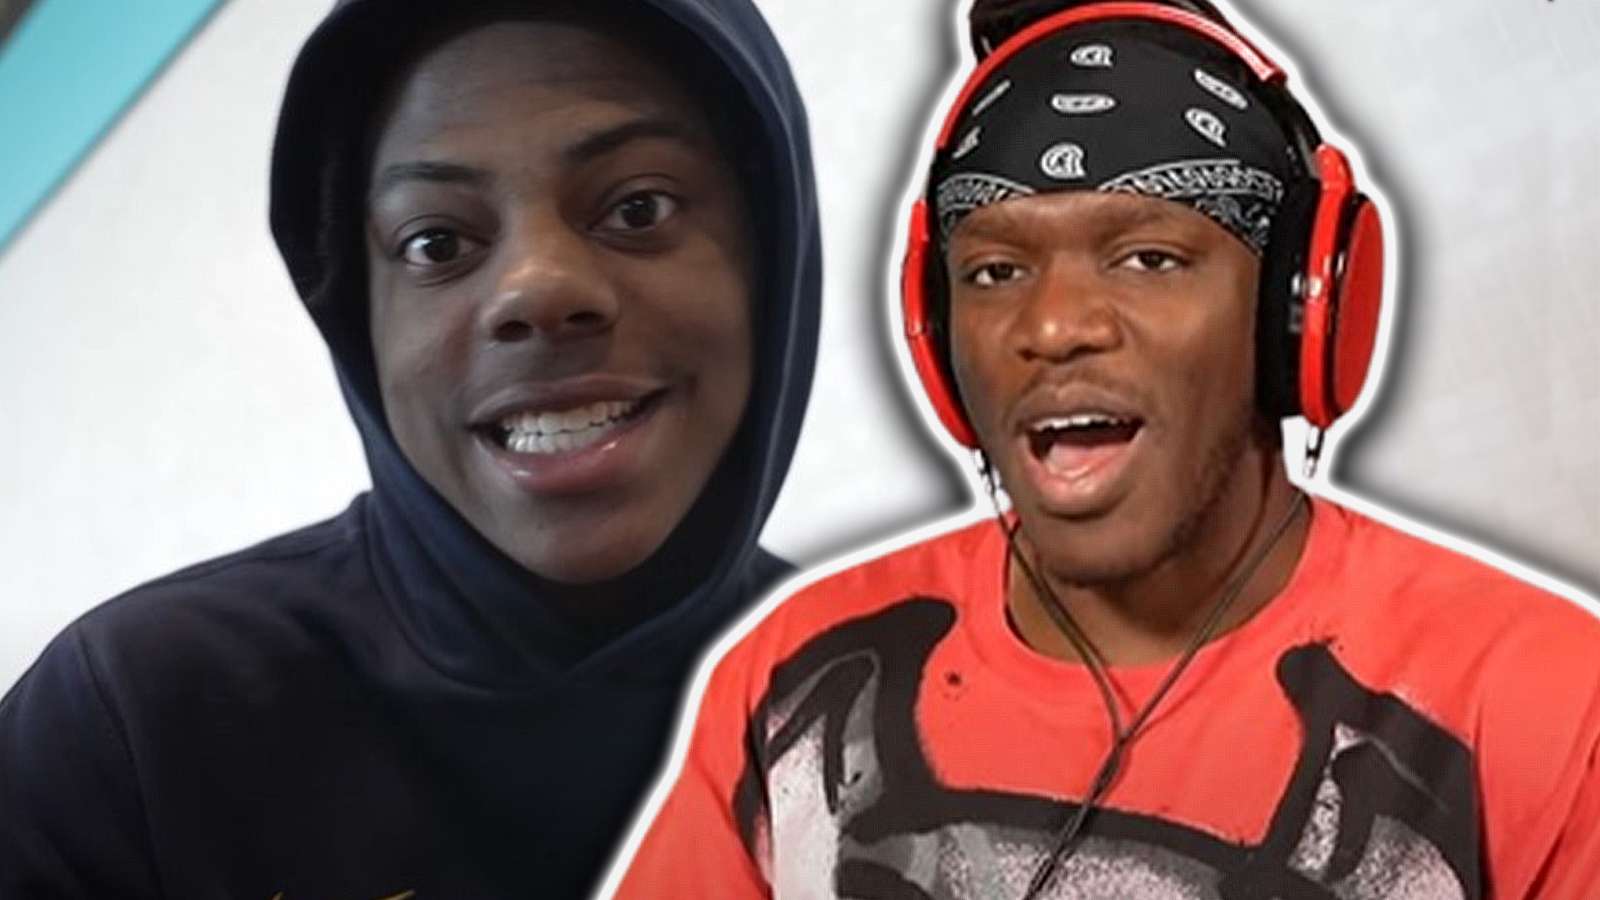 IShowSpeed says KSI made 'excuses' not to fight him